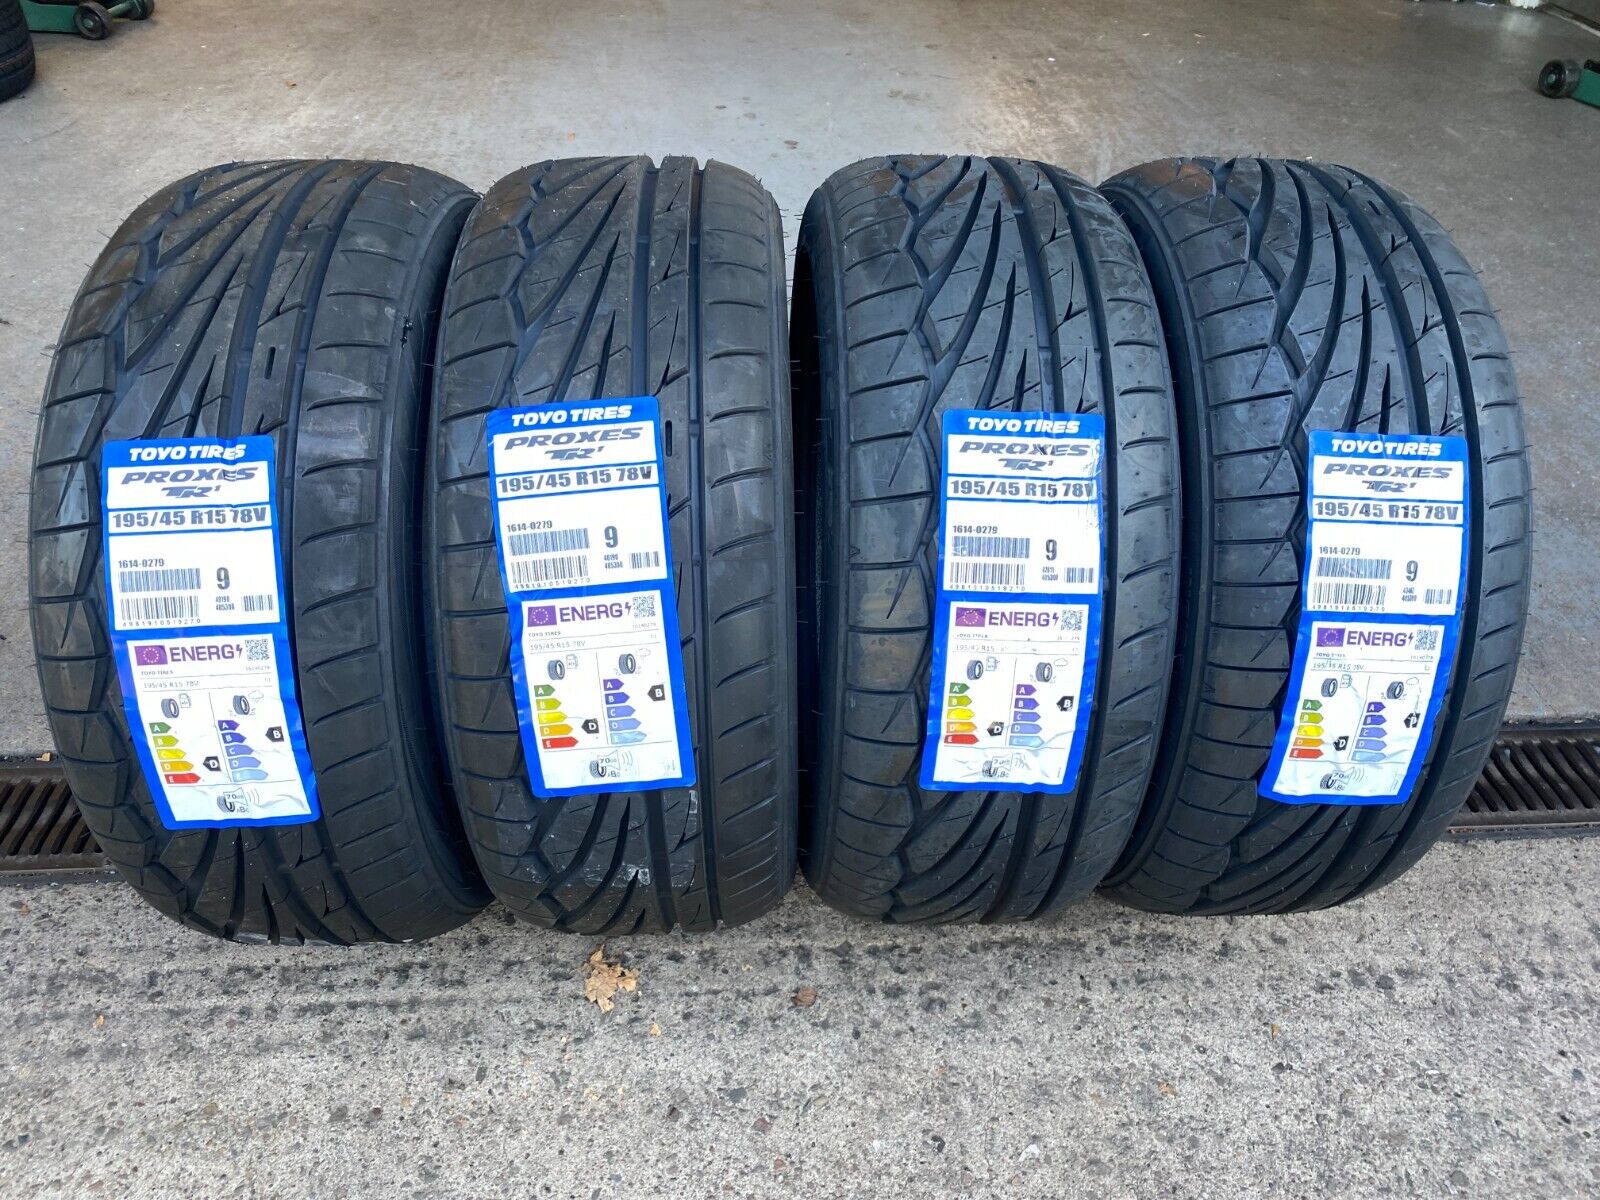 X4 195 45 15 TOYO PROXES TR-1 TRACK DAY/ ROAD TOP QUALITY TYRES 195/45R15  78V | eBay